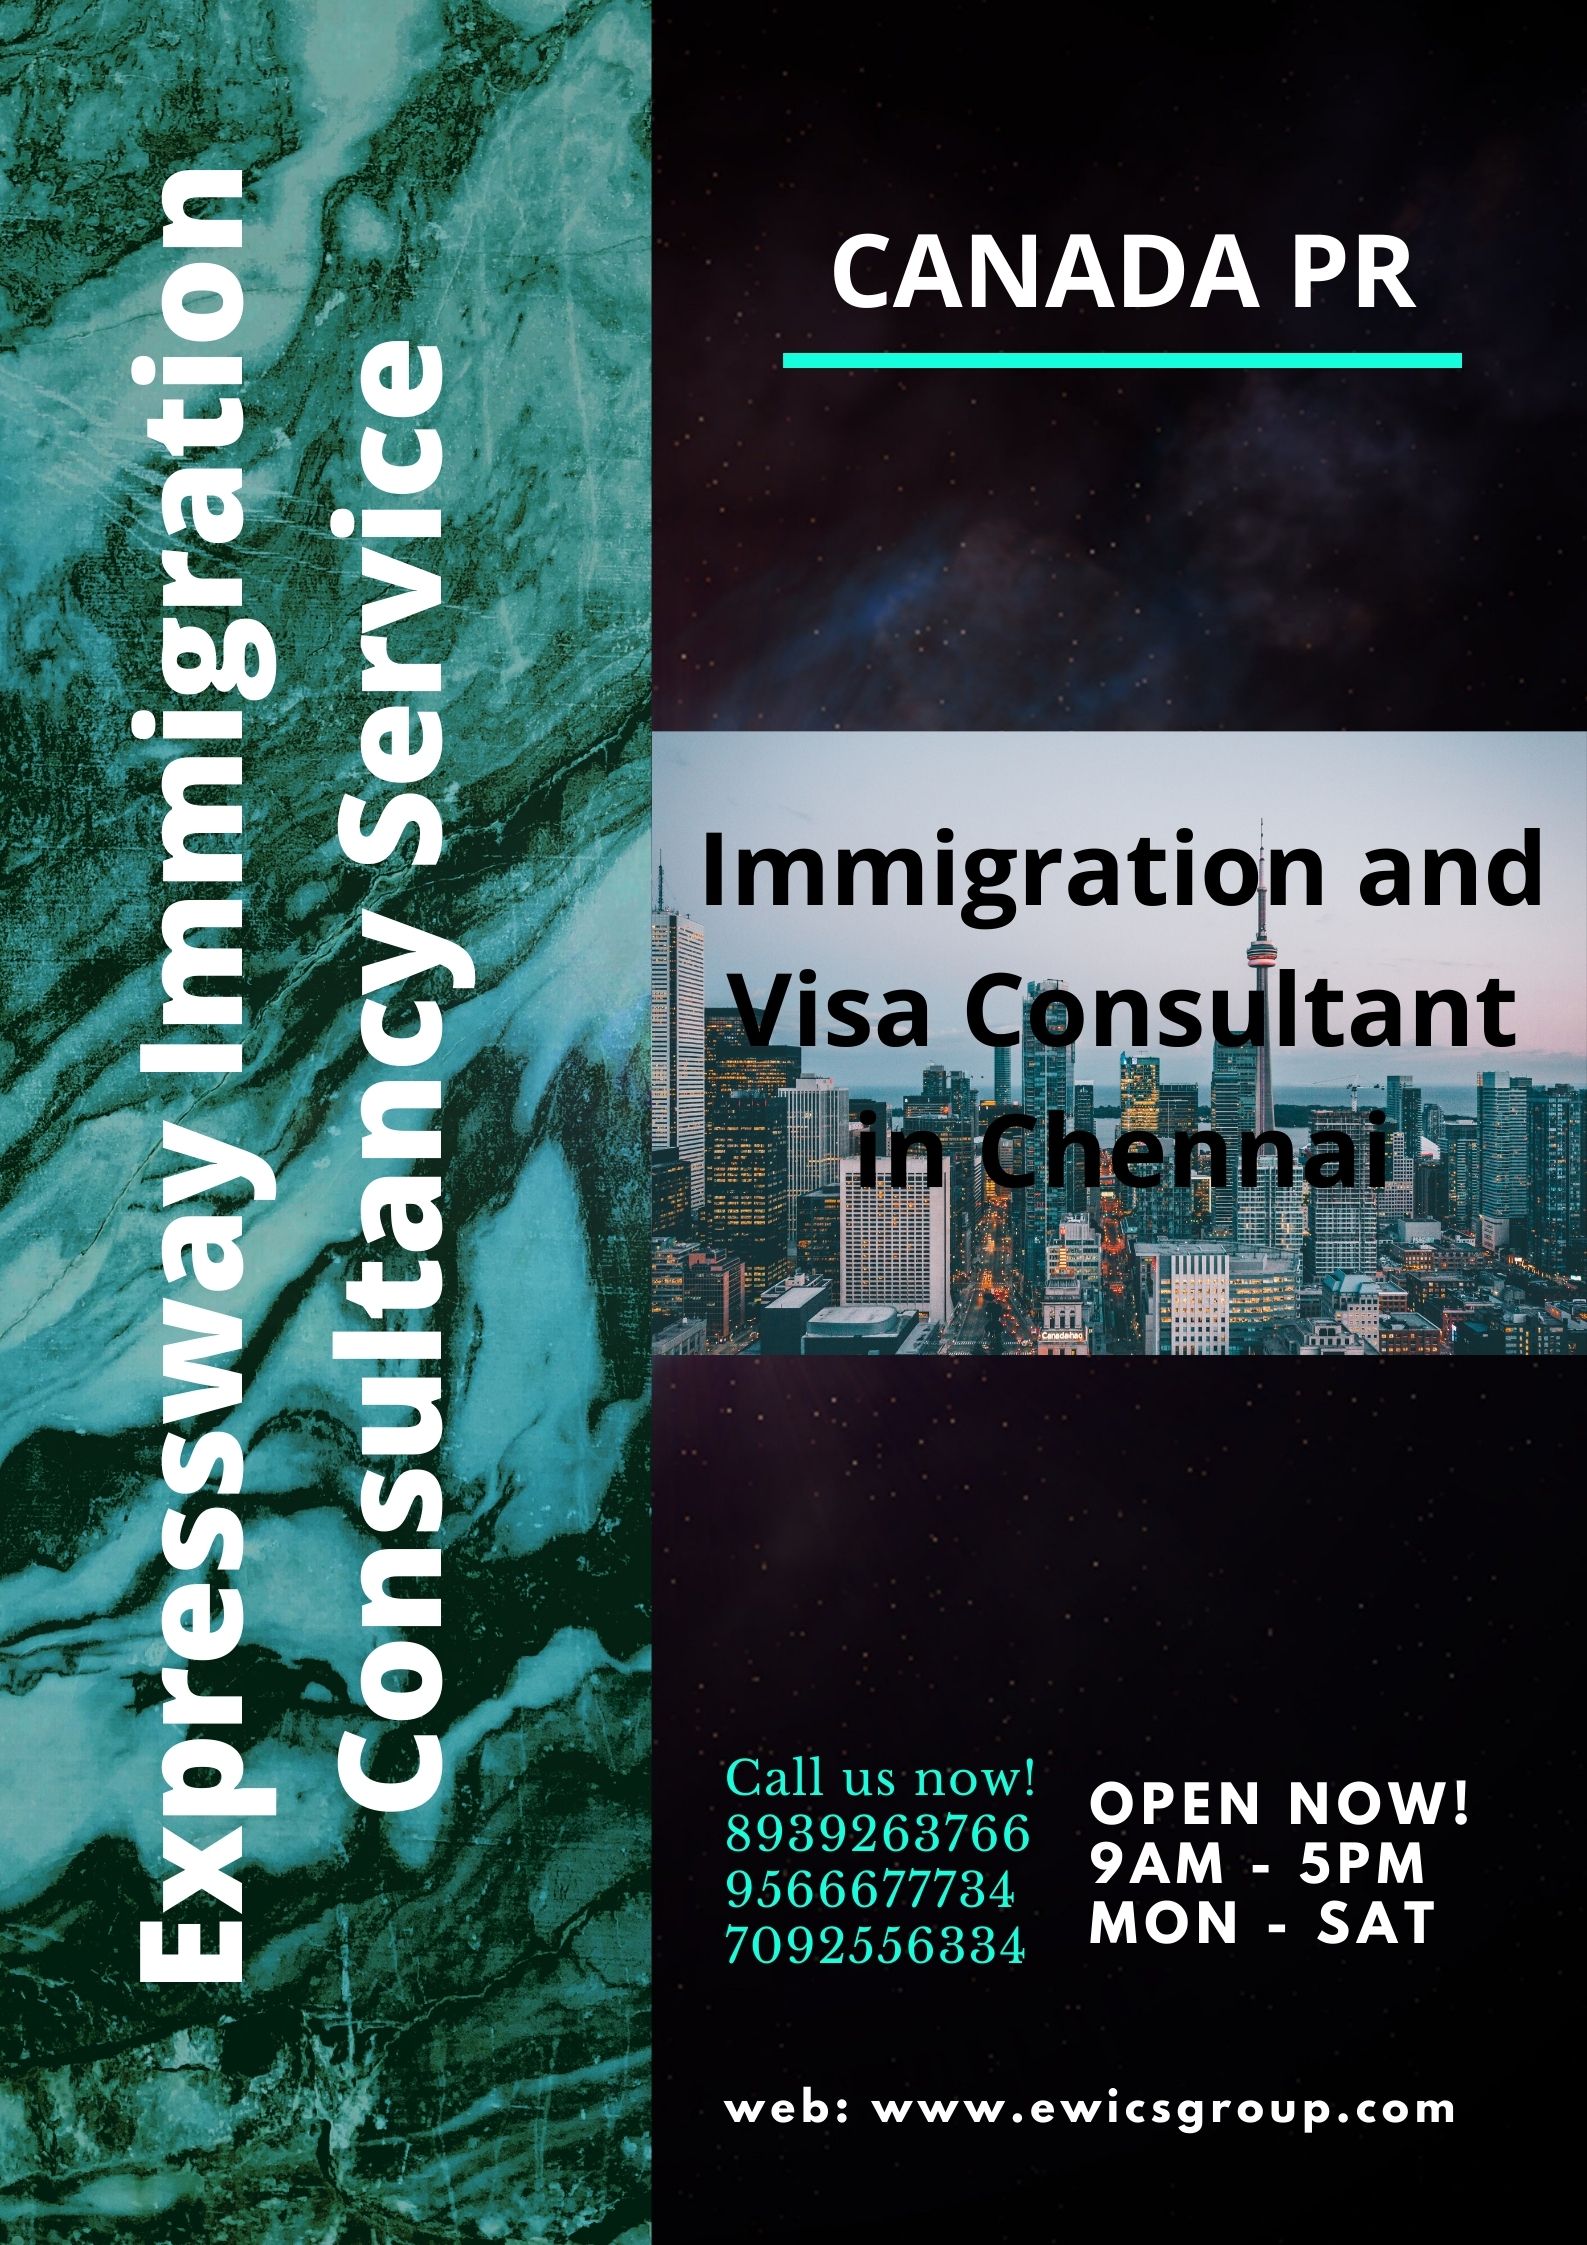 Expressway Immigration Consultancy Service